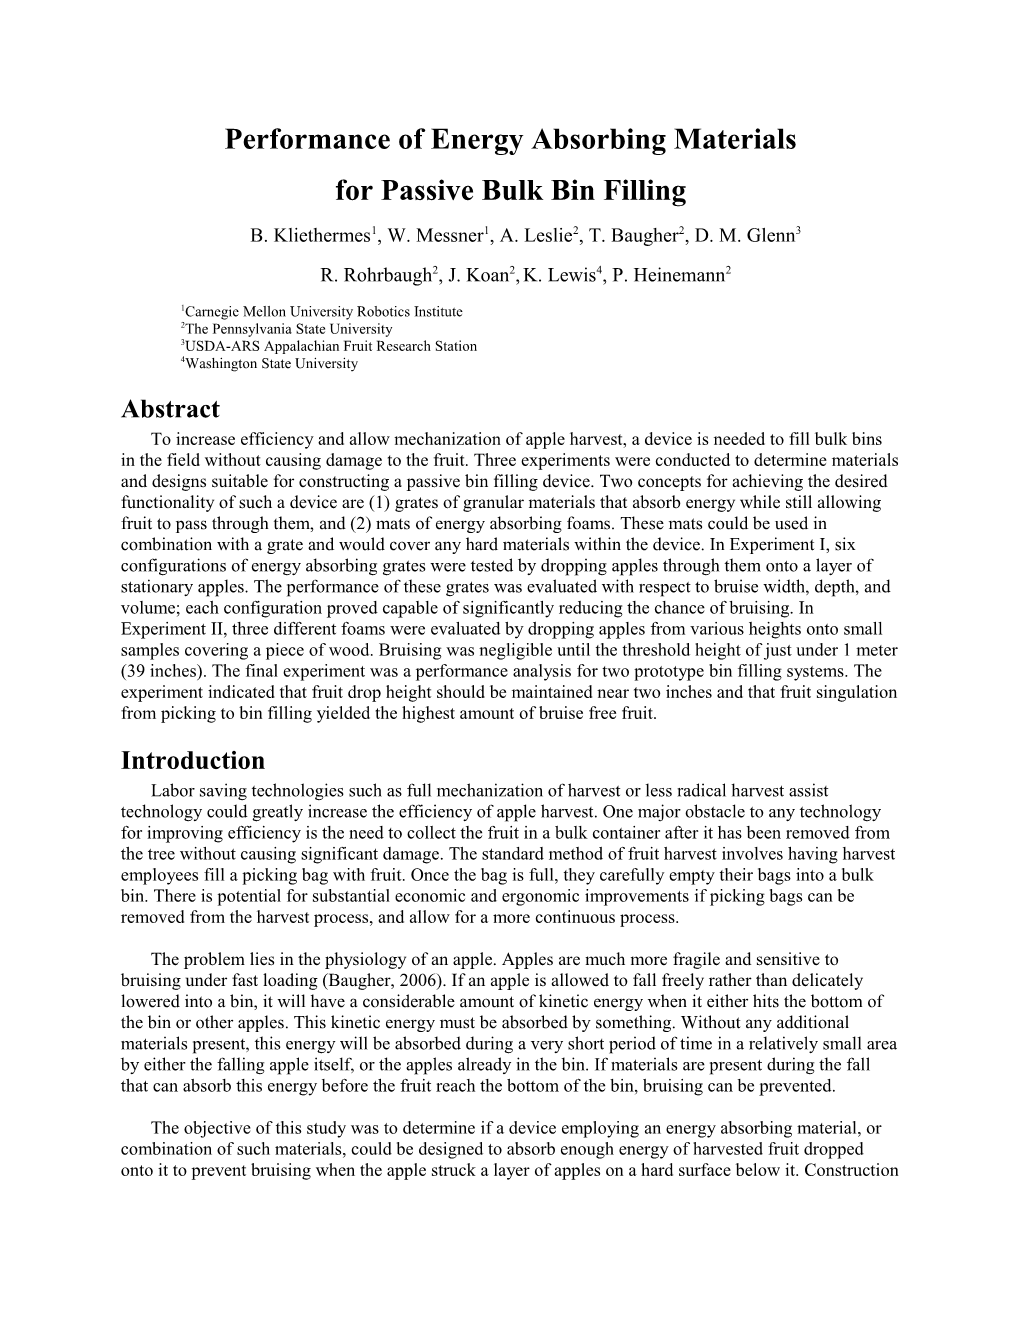 Performance of Energy Absorbing Materials and Devices for Passive Bulk Bin Filling